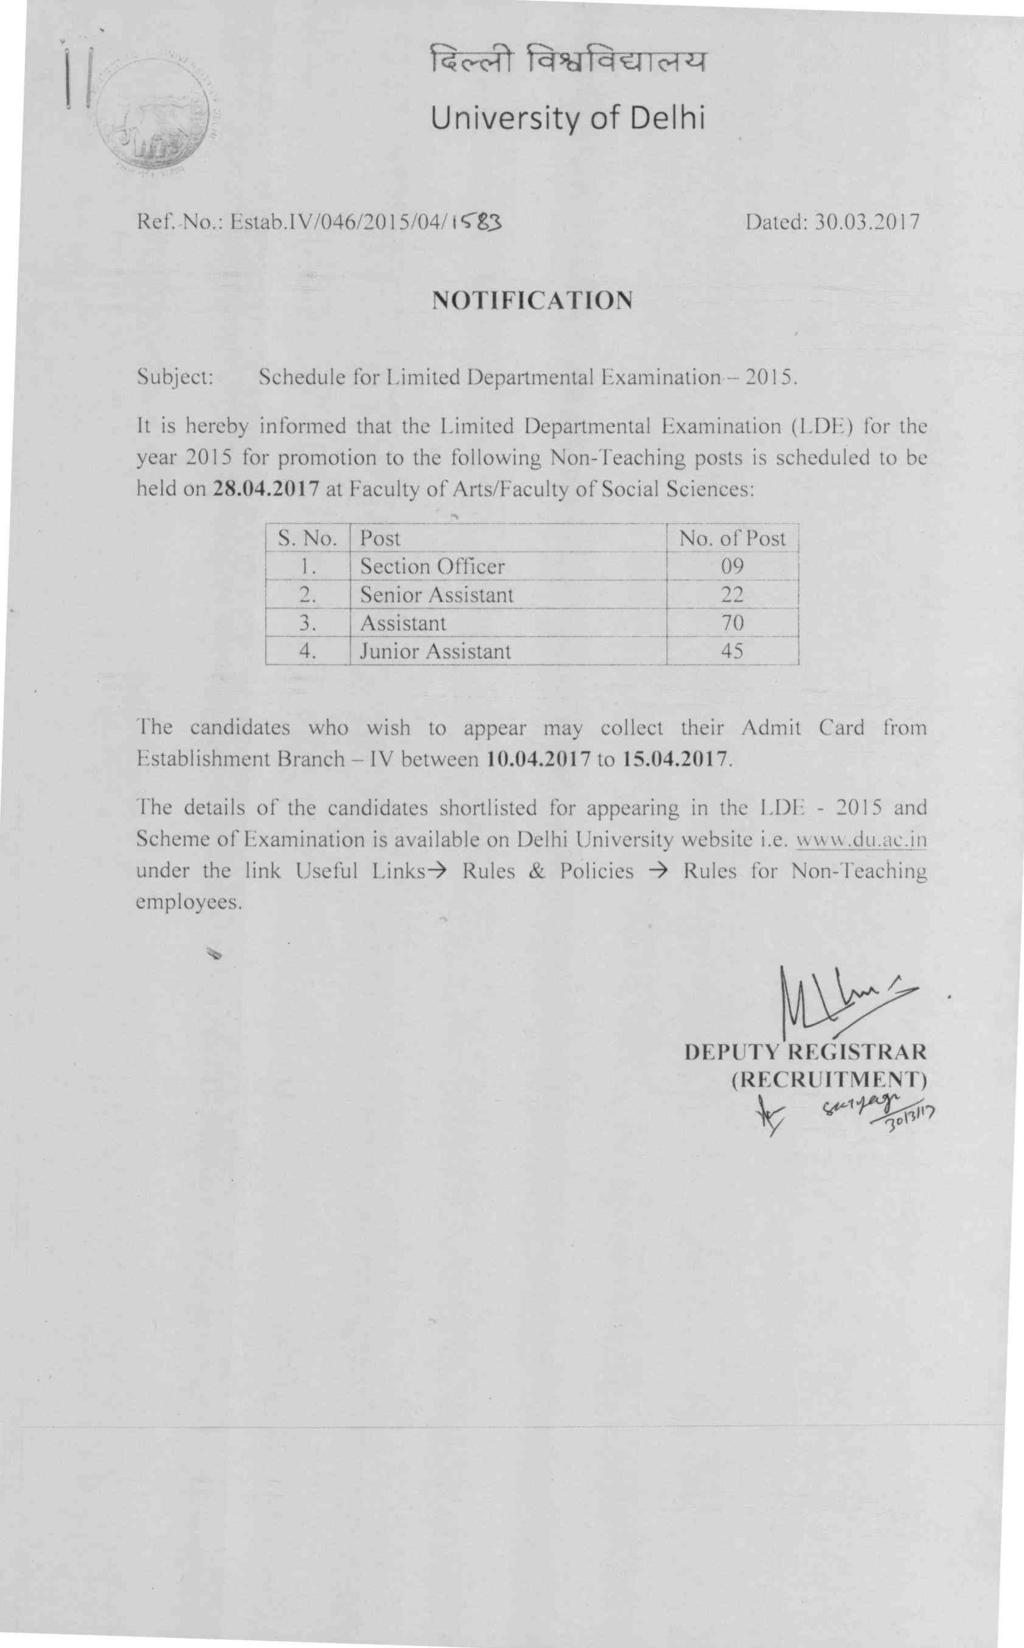 I I Estab.IV/046/2015/04/ i cg3 Dated: 30.03.2017 NOTIFICATION Subject: Schedule for Limited Departmental Examination - 2015.